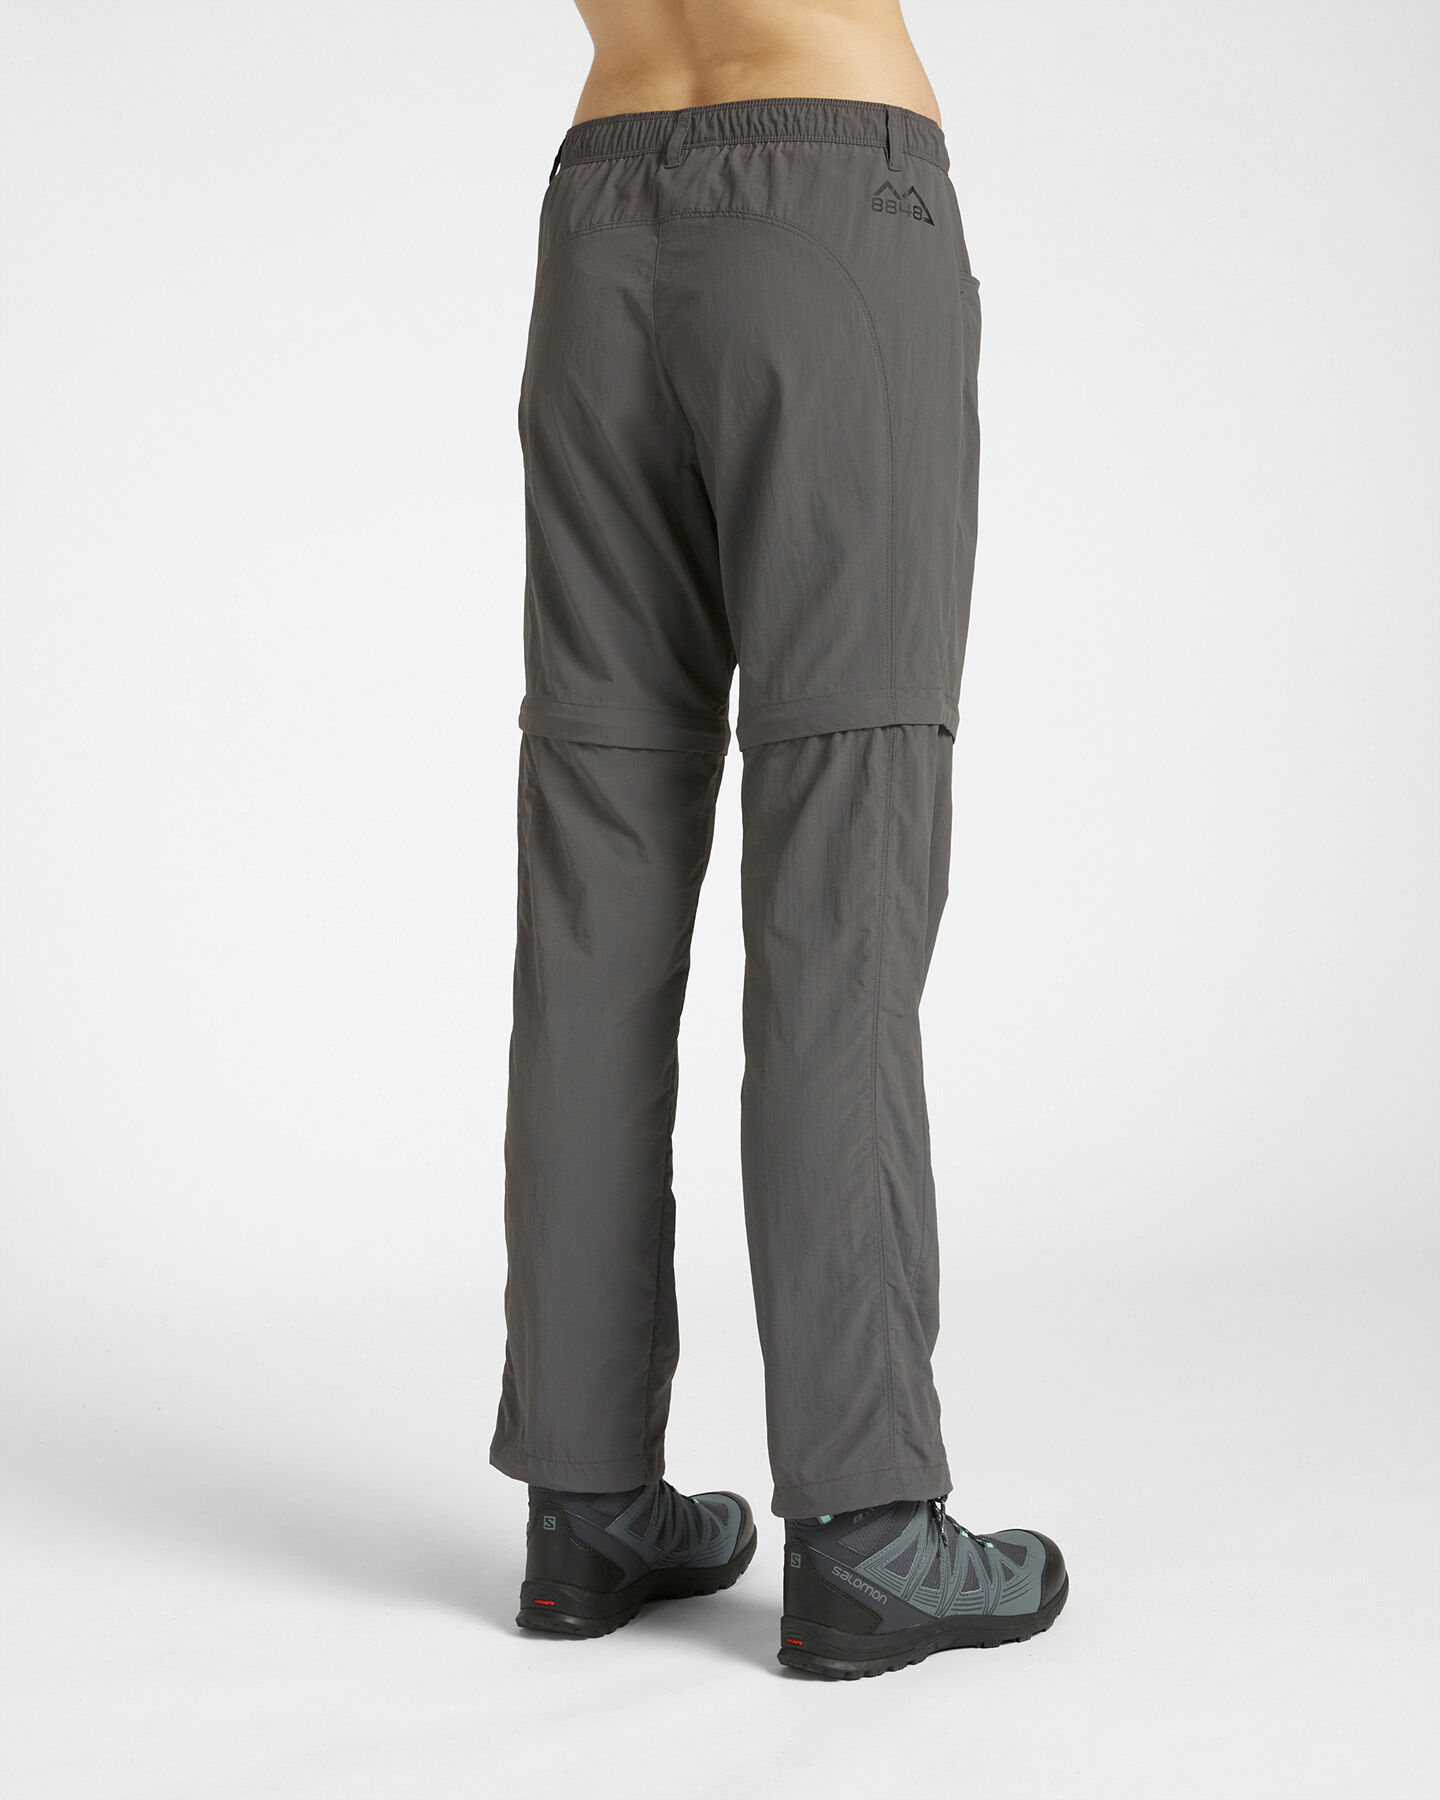  Pantalone outdoor 8848 MOUNTAIN ESSENTIAL W S4120735|986|M scatto 1